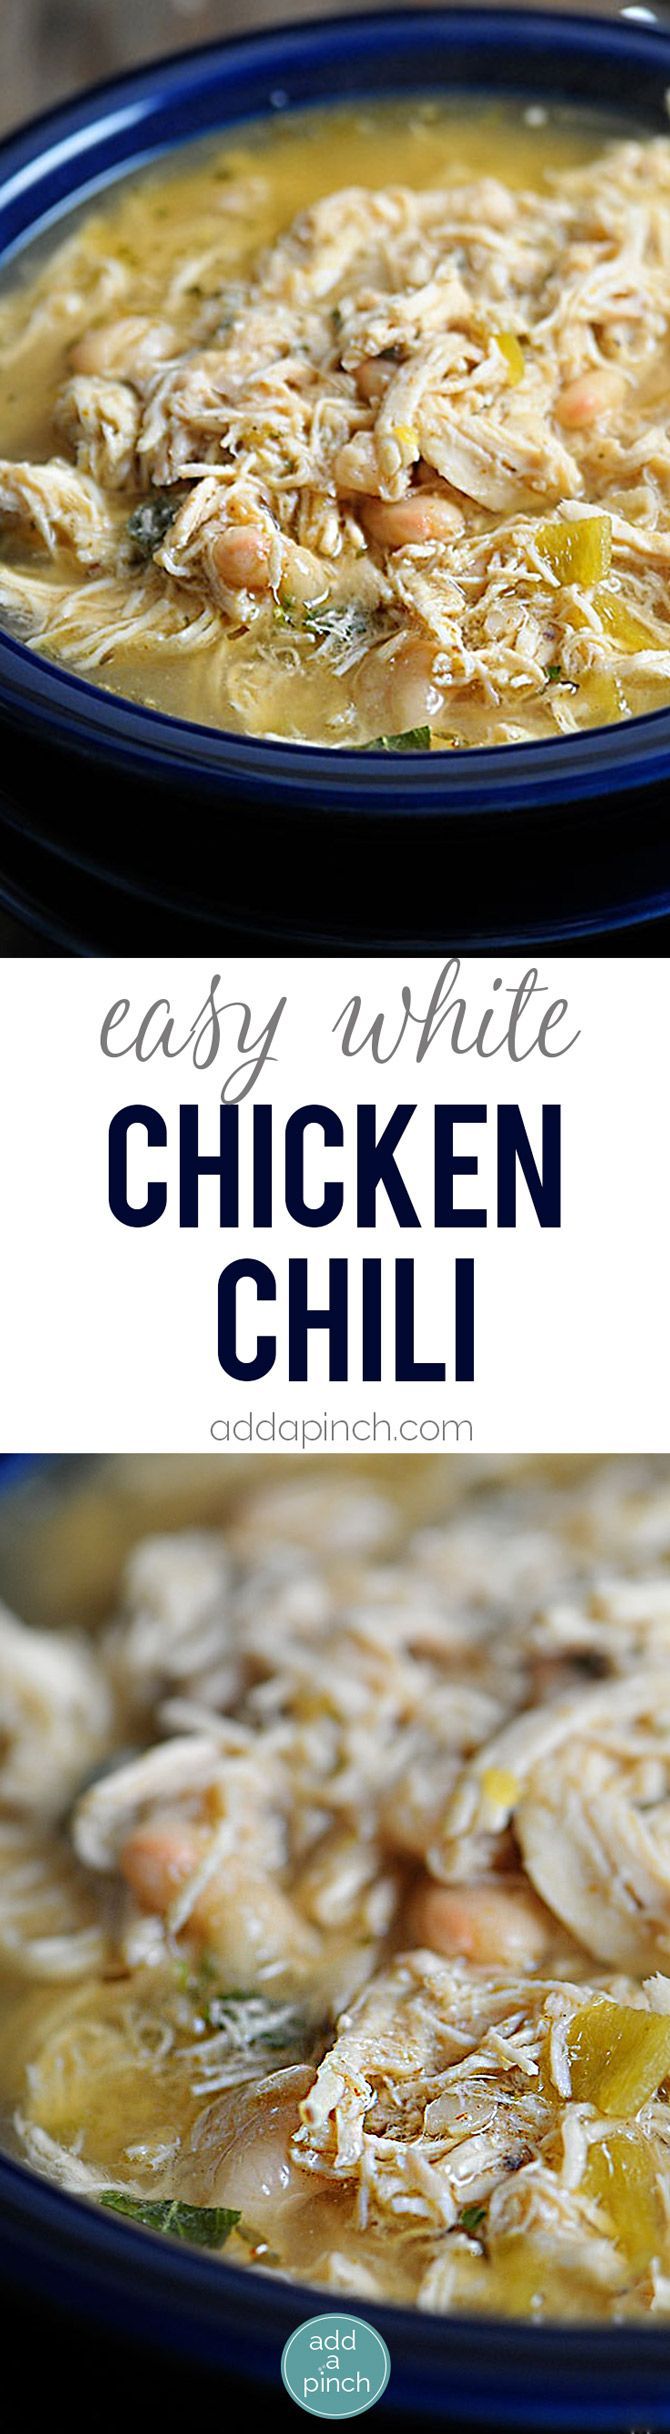 White Chicken Chili makes a delicious meal full of spicy chili flavor, white beans and chicken.